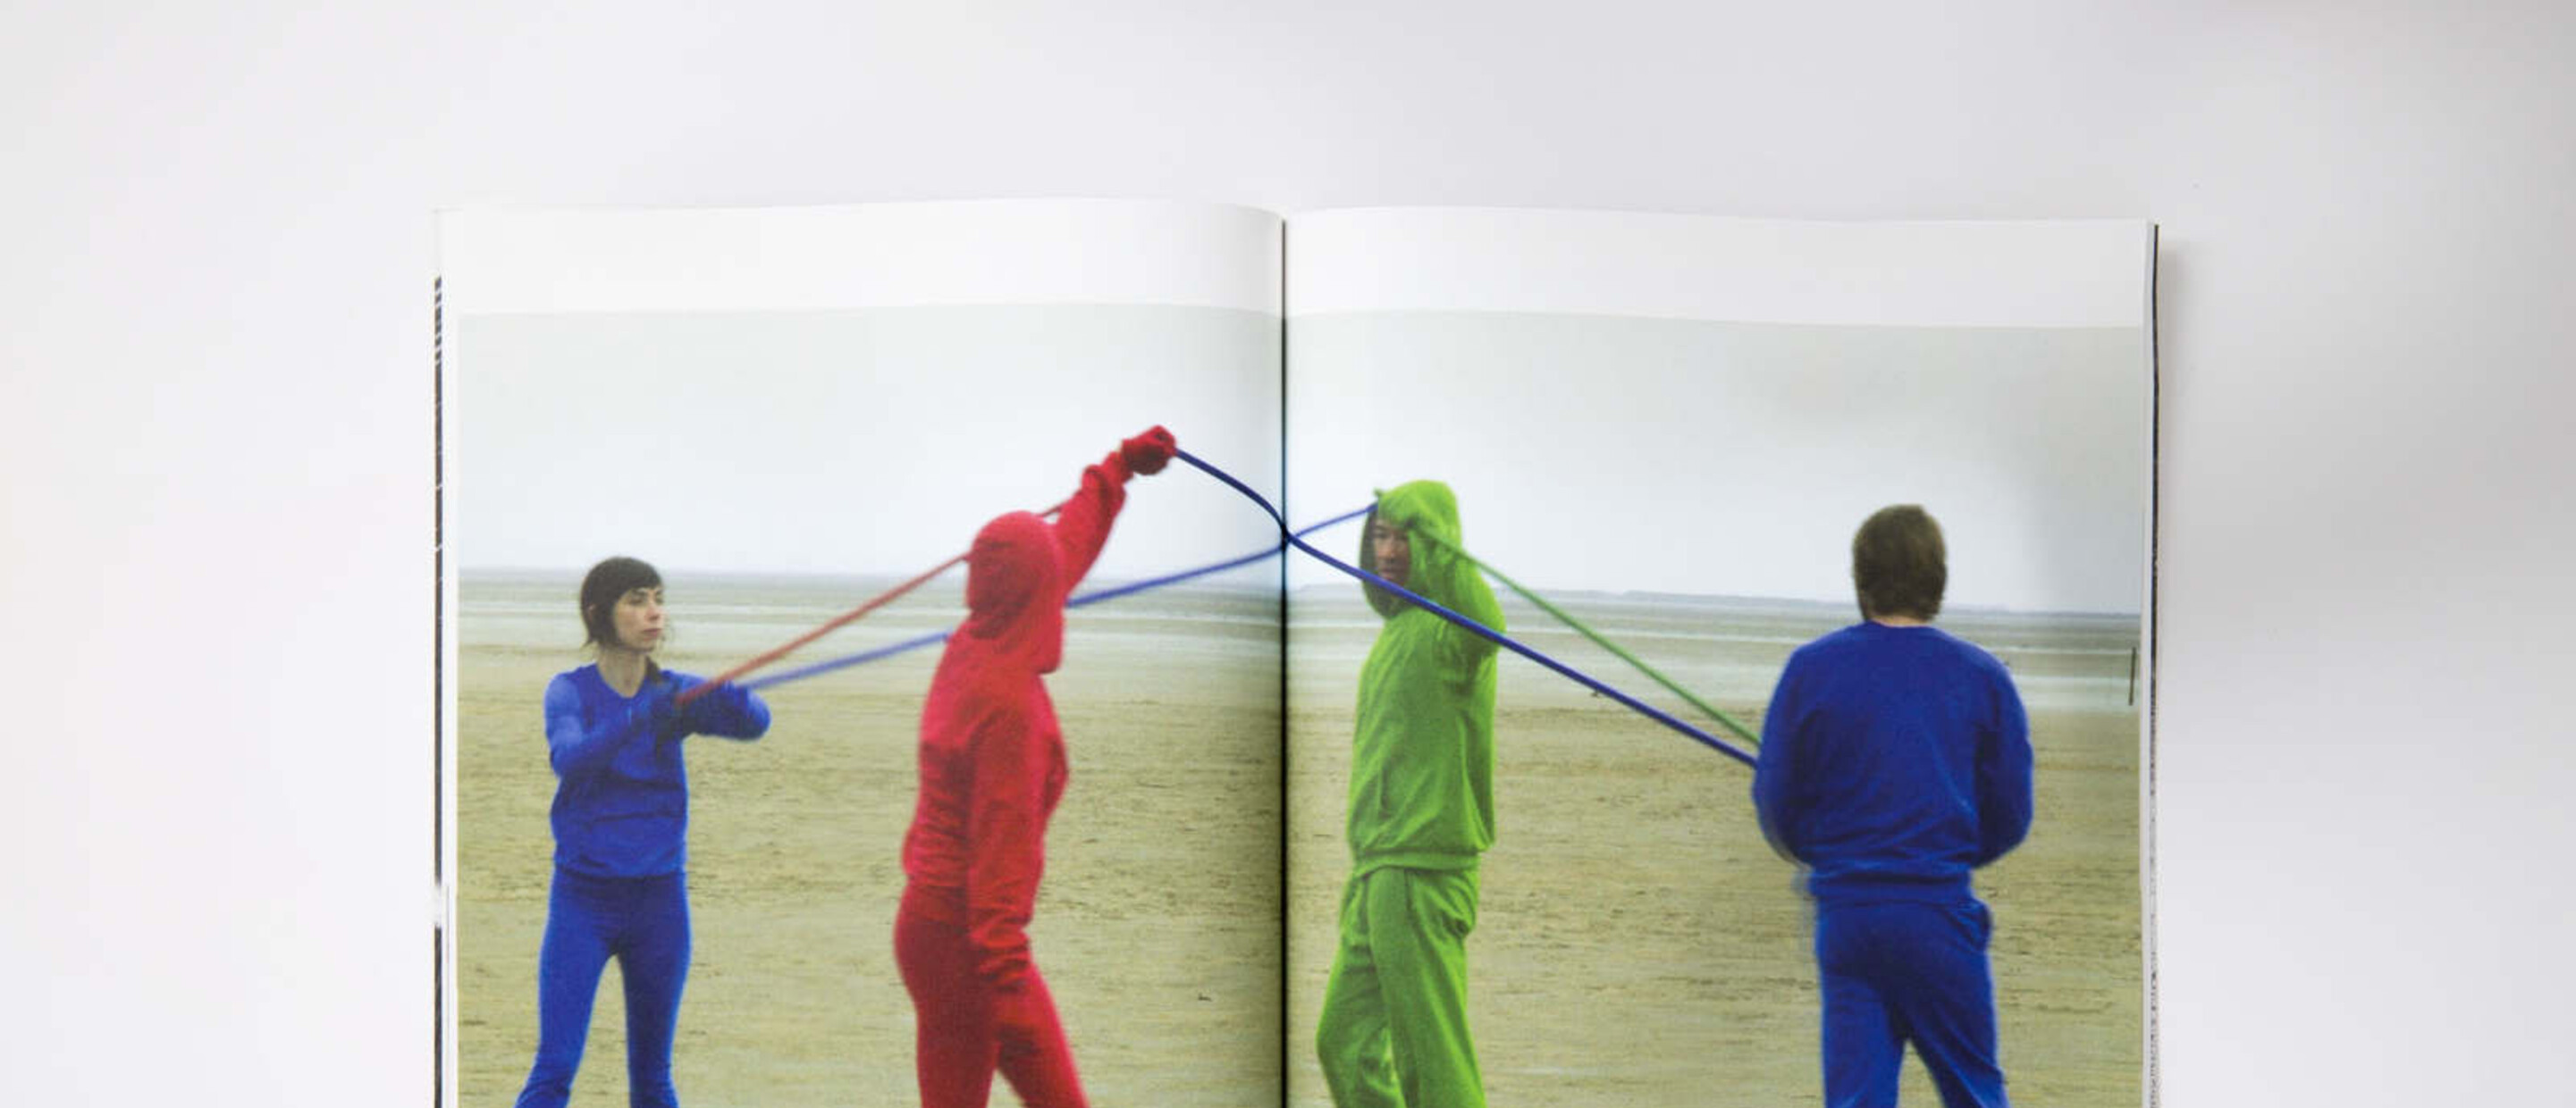 Catalogue spread showing photograph of 4 figures in primary colored outfits connected by thread